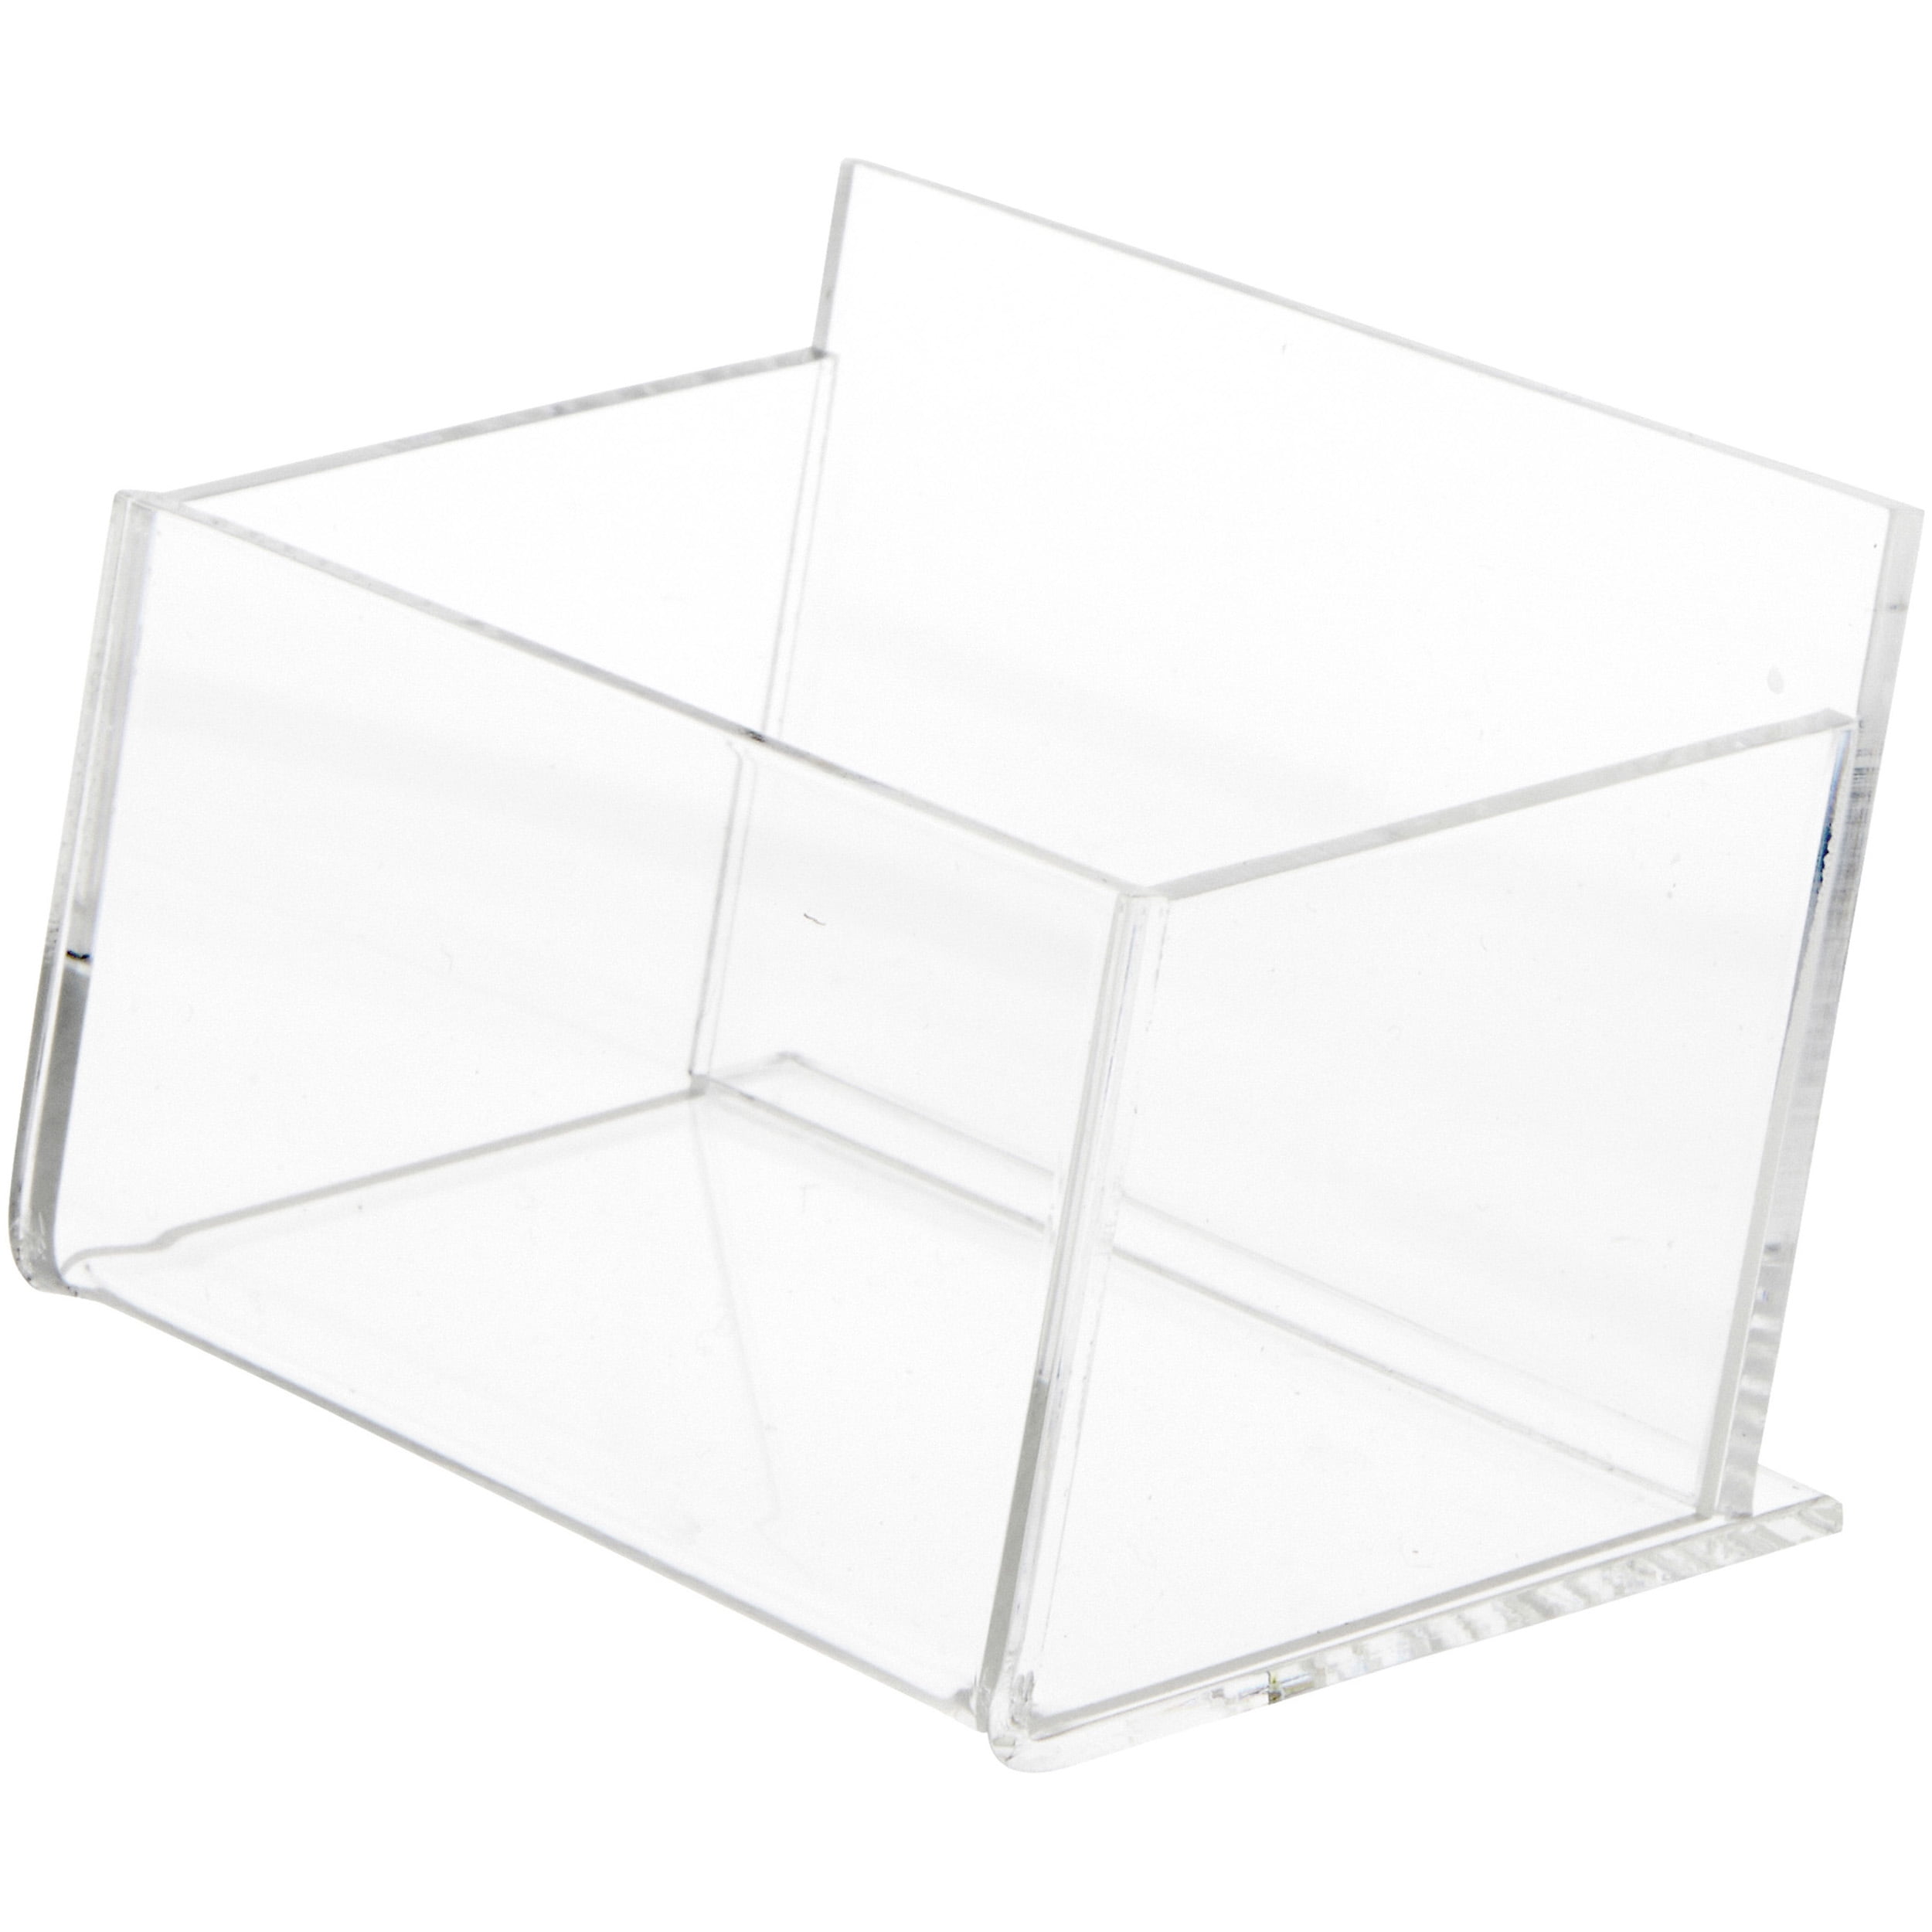 Plymor Clear Acrylic Deluxe Business Card Holder & Display